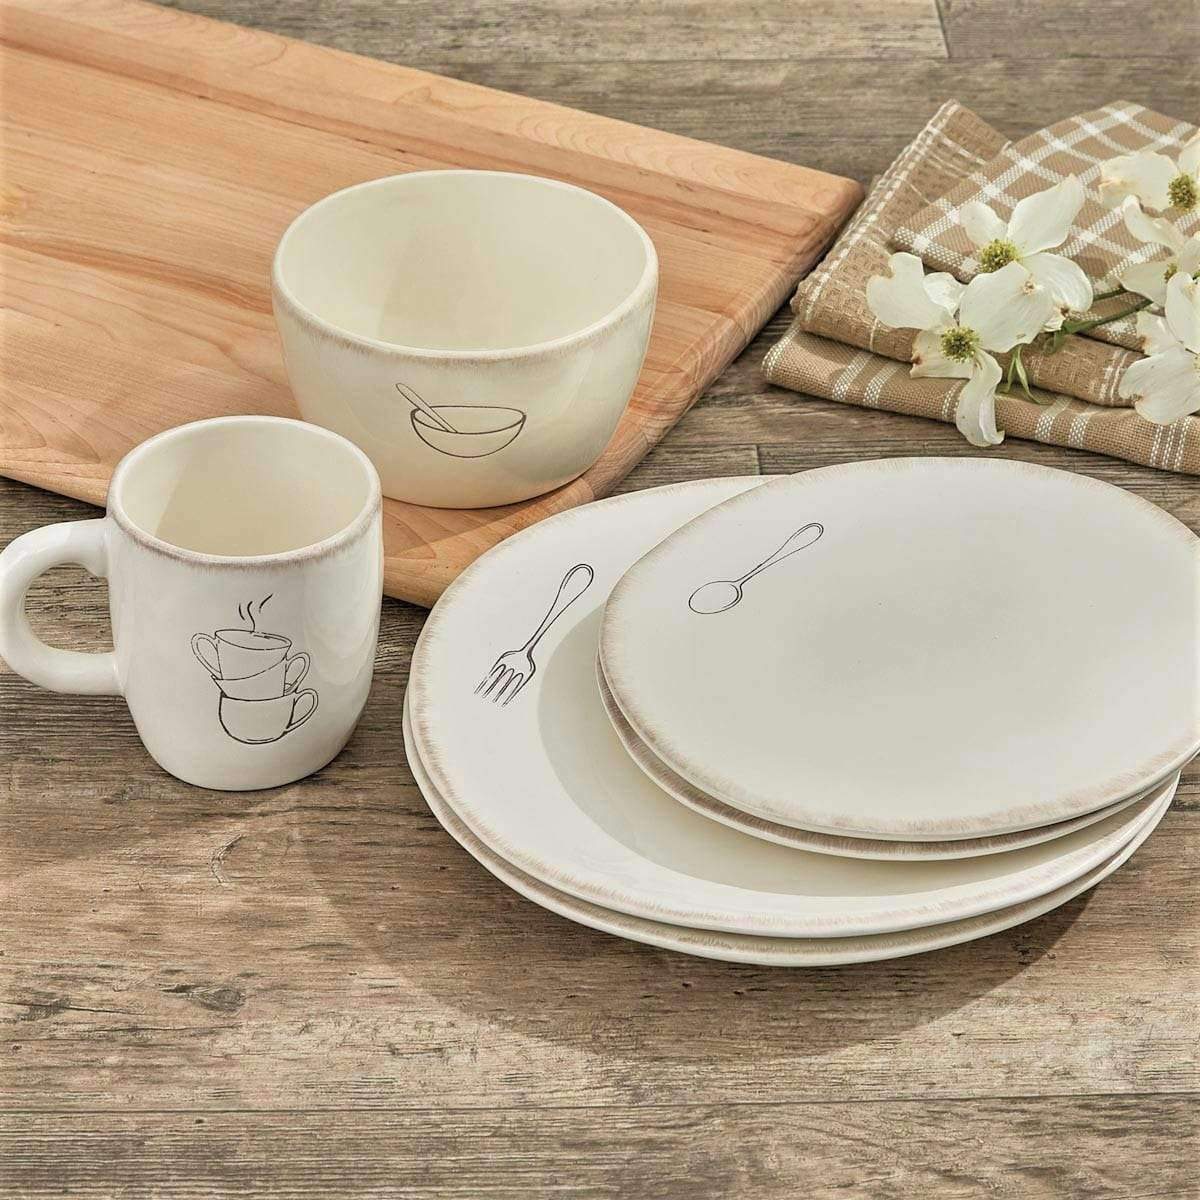 Affordable White Porcelain Dishes Farmhouse Style - Refresh Restyle